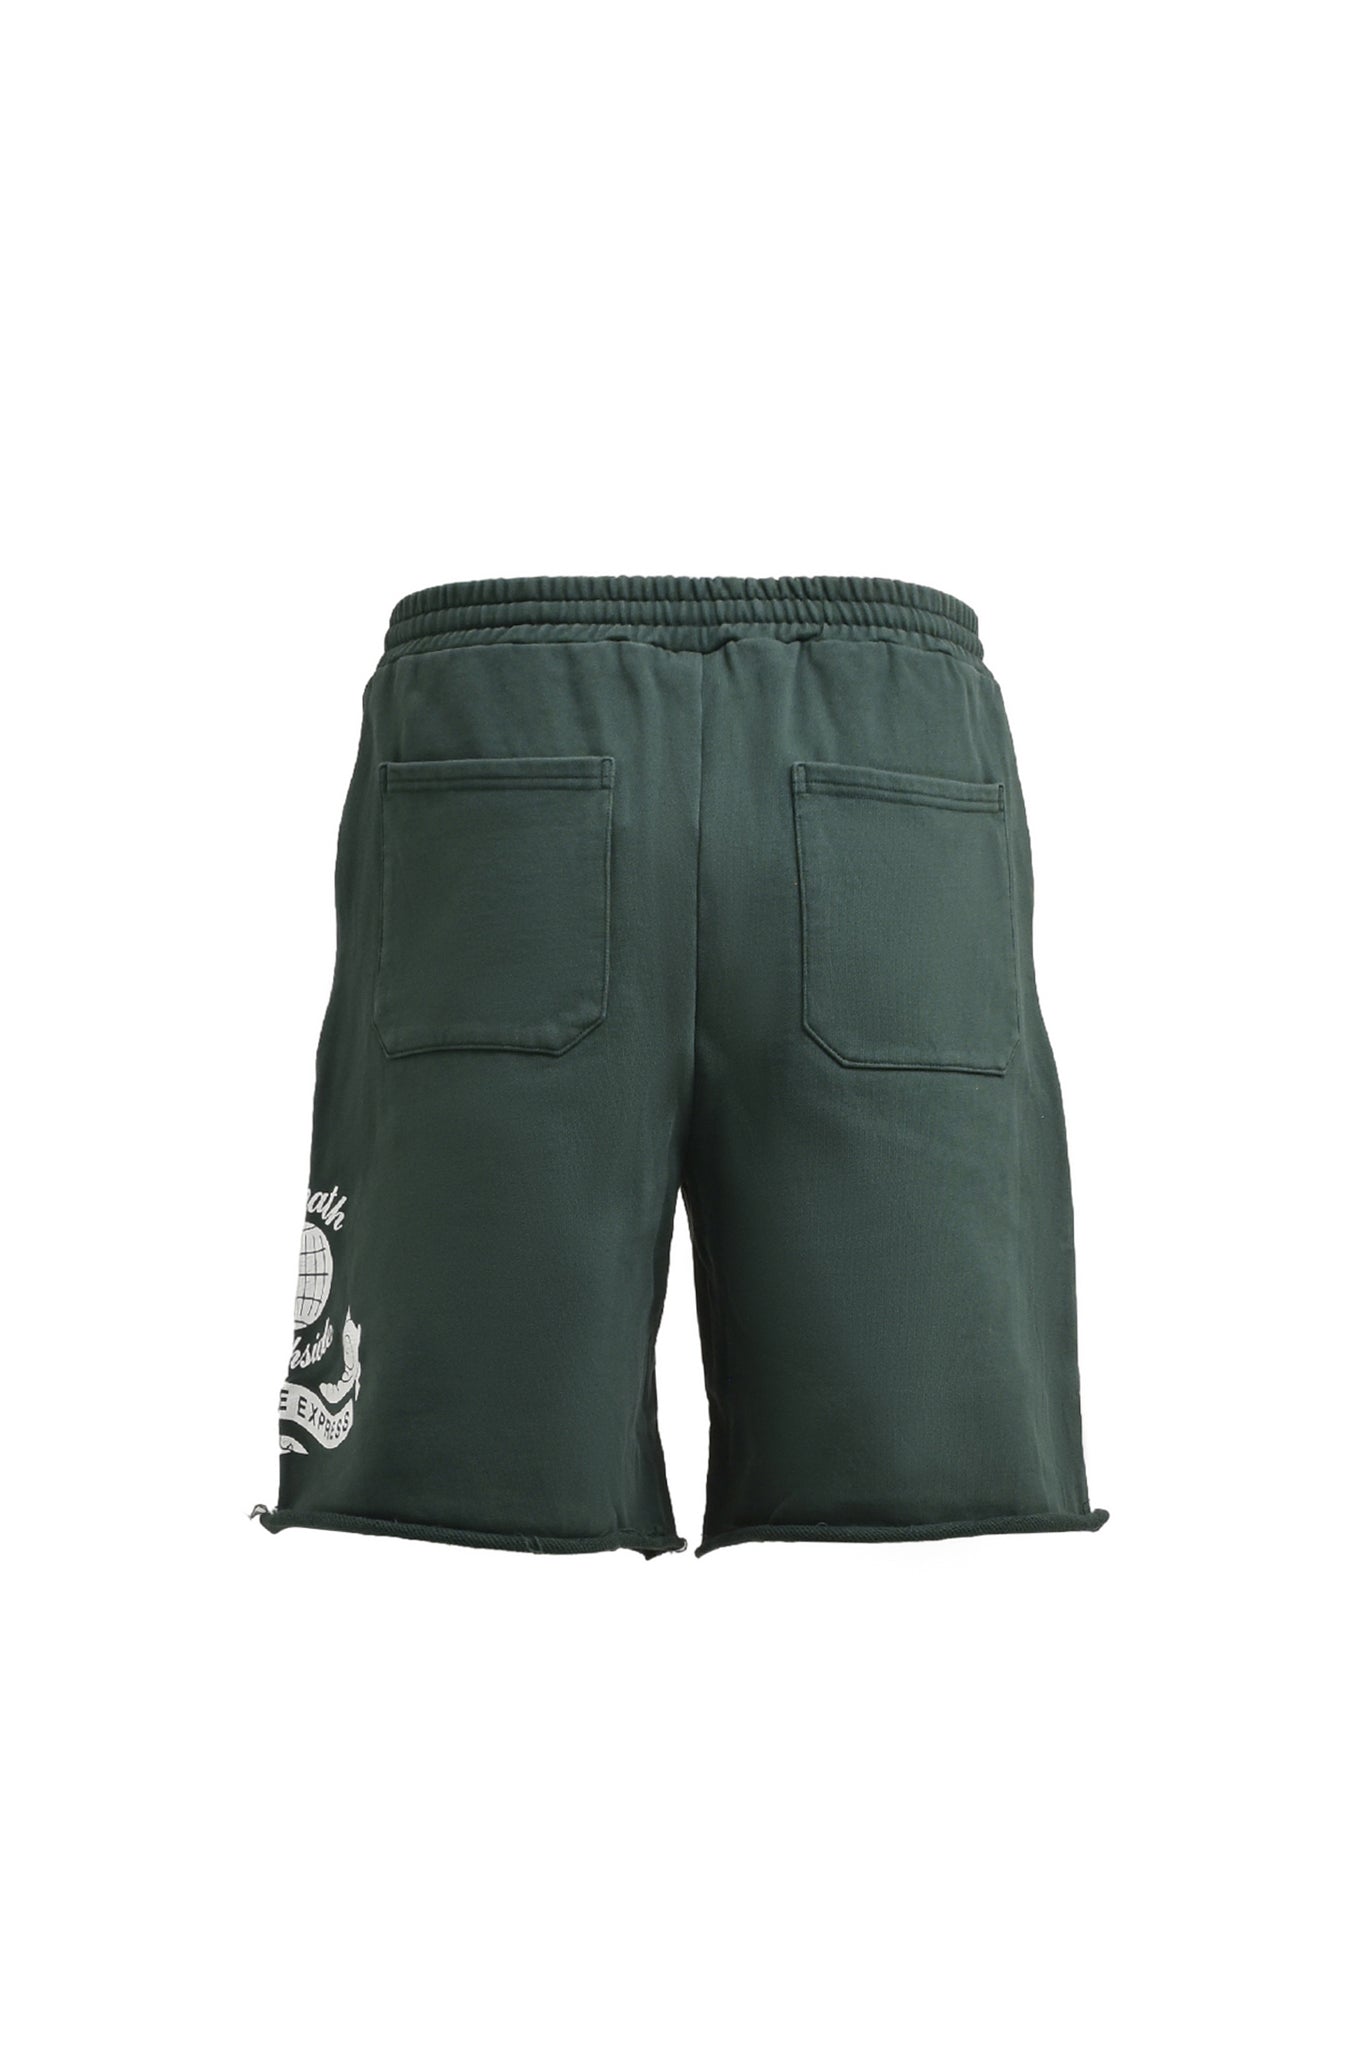 S.S.E LOGO SWEAT SHORTS / FOREST